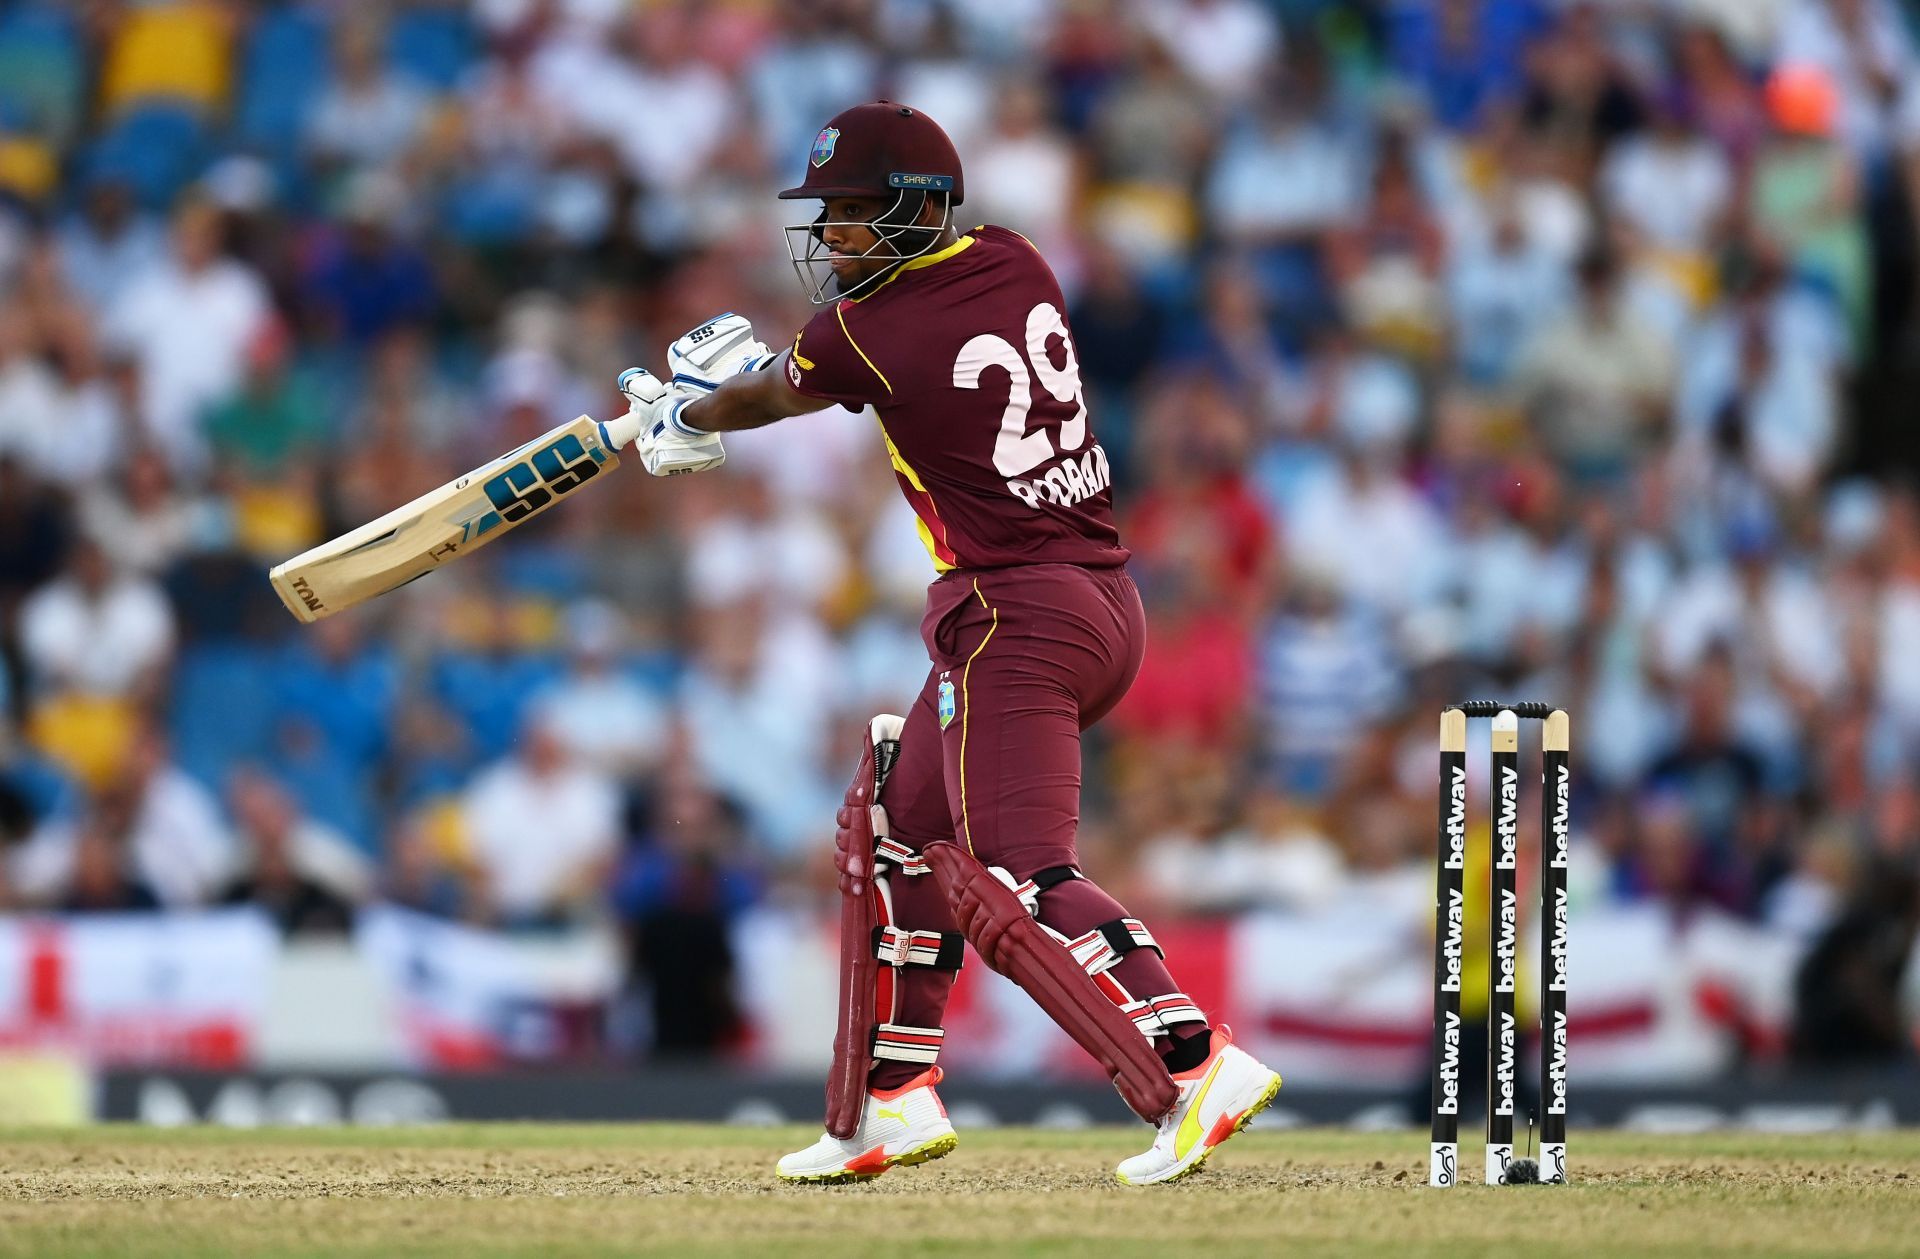 Nicholas Pooran can be a real match-winner for West Indies